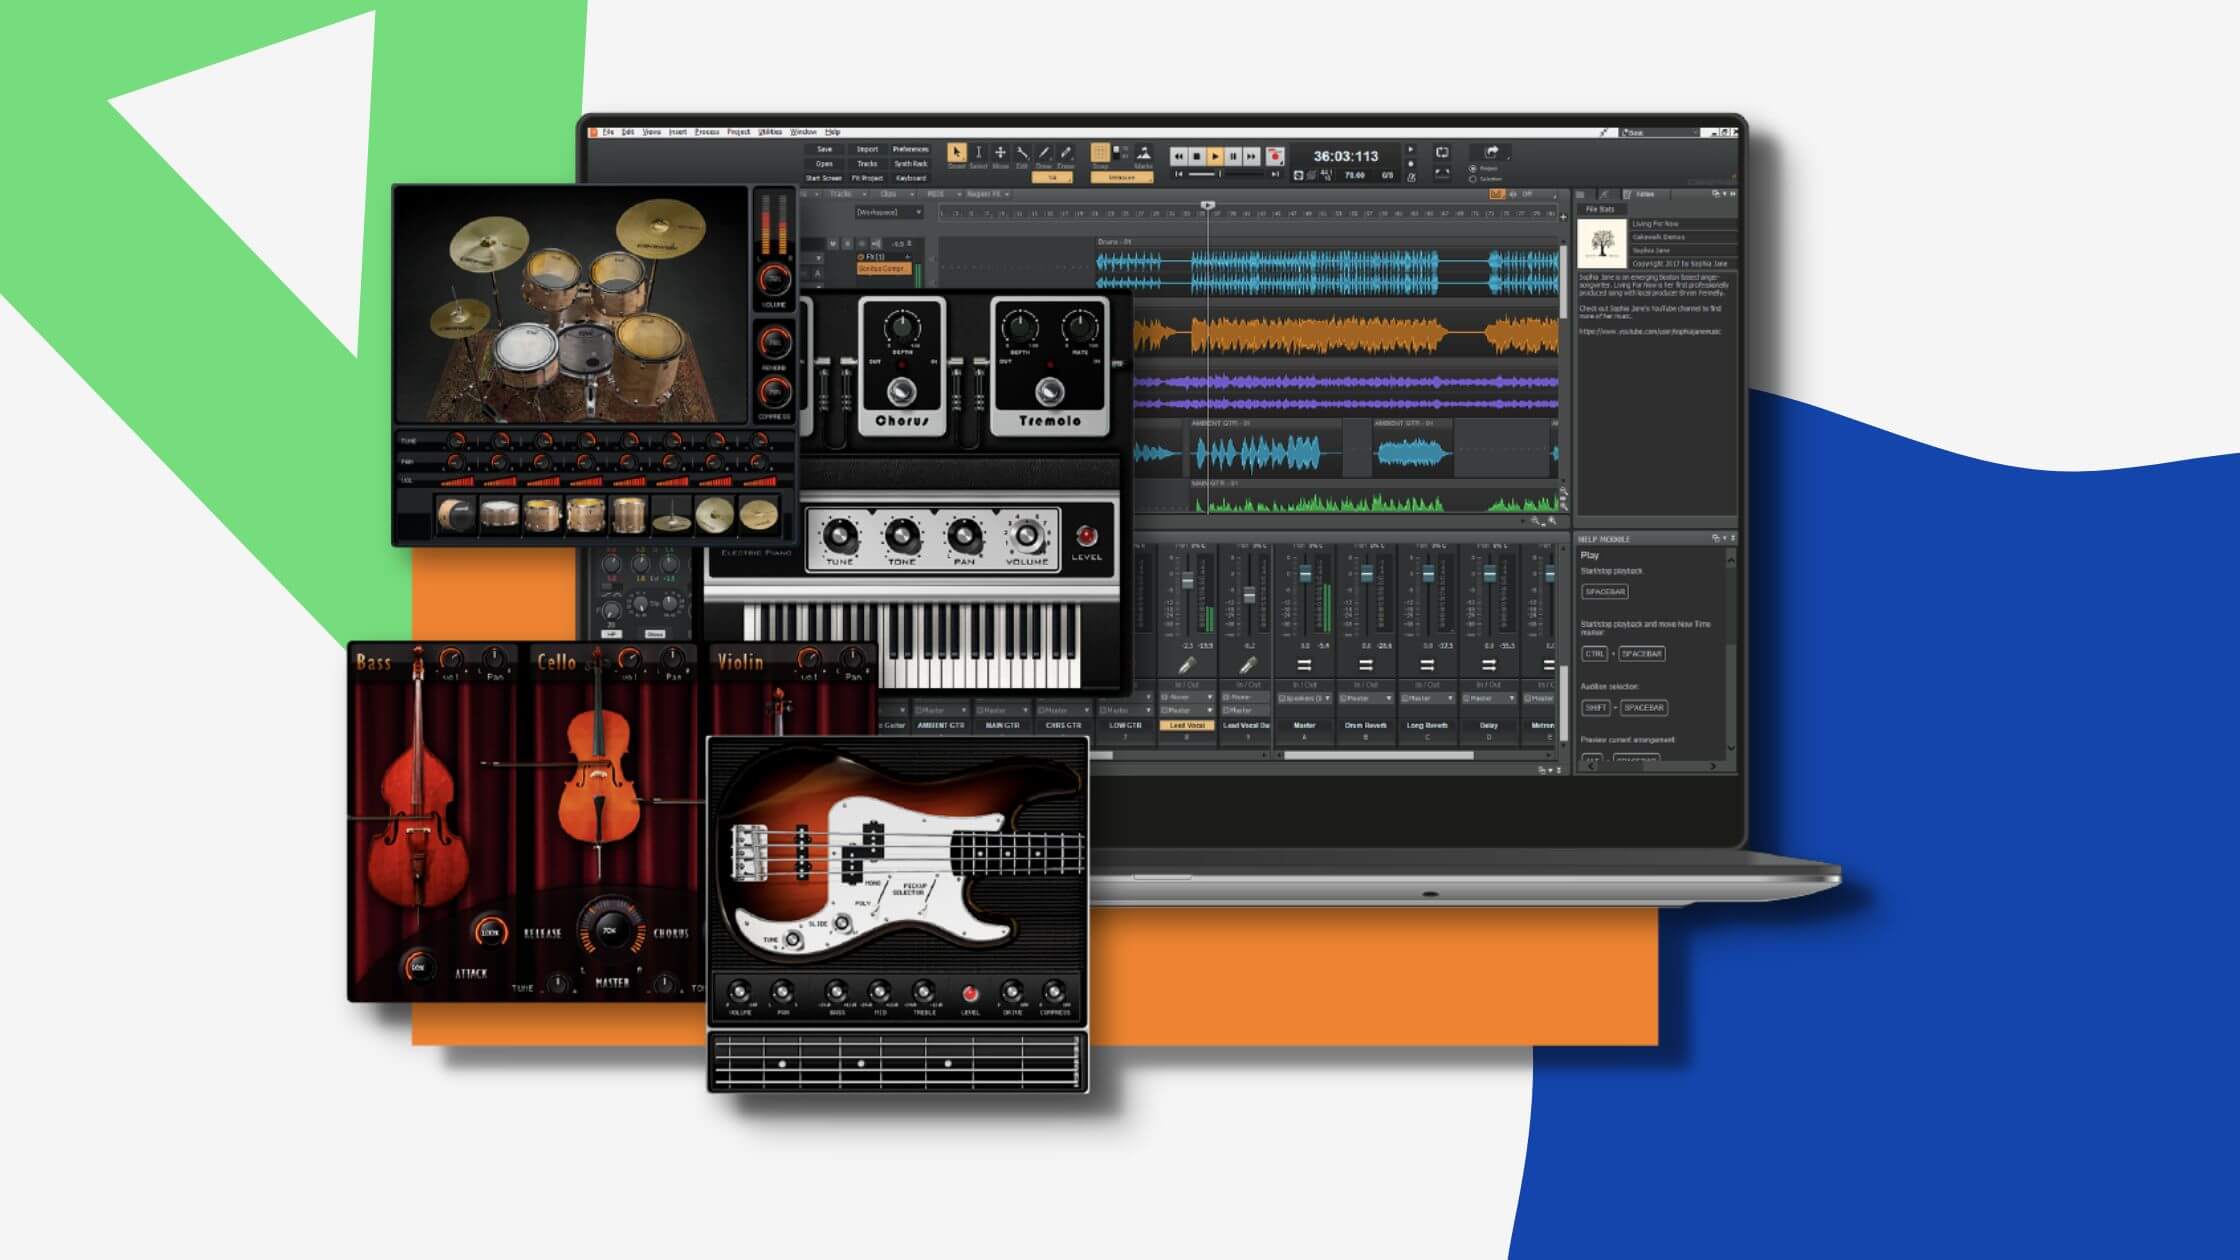 Cakewalk by BandLab is to be replaced by Cakewalk Sonar & Cakewalk Next with macOS compatibility